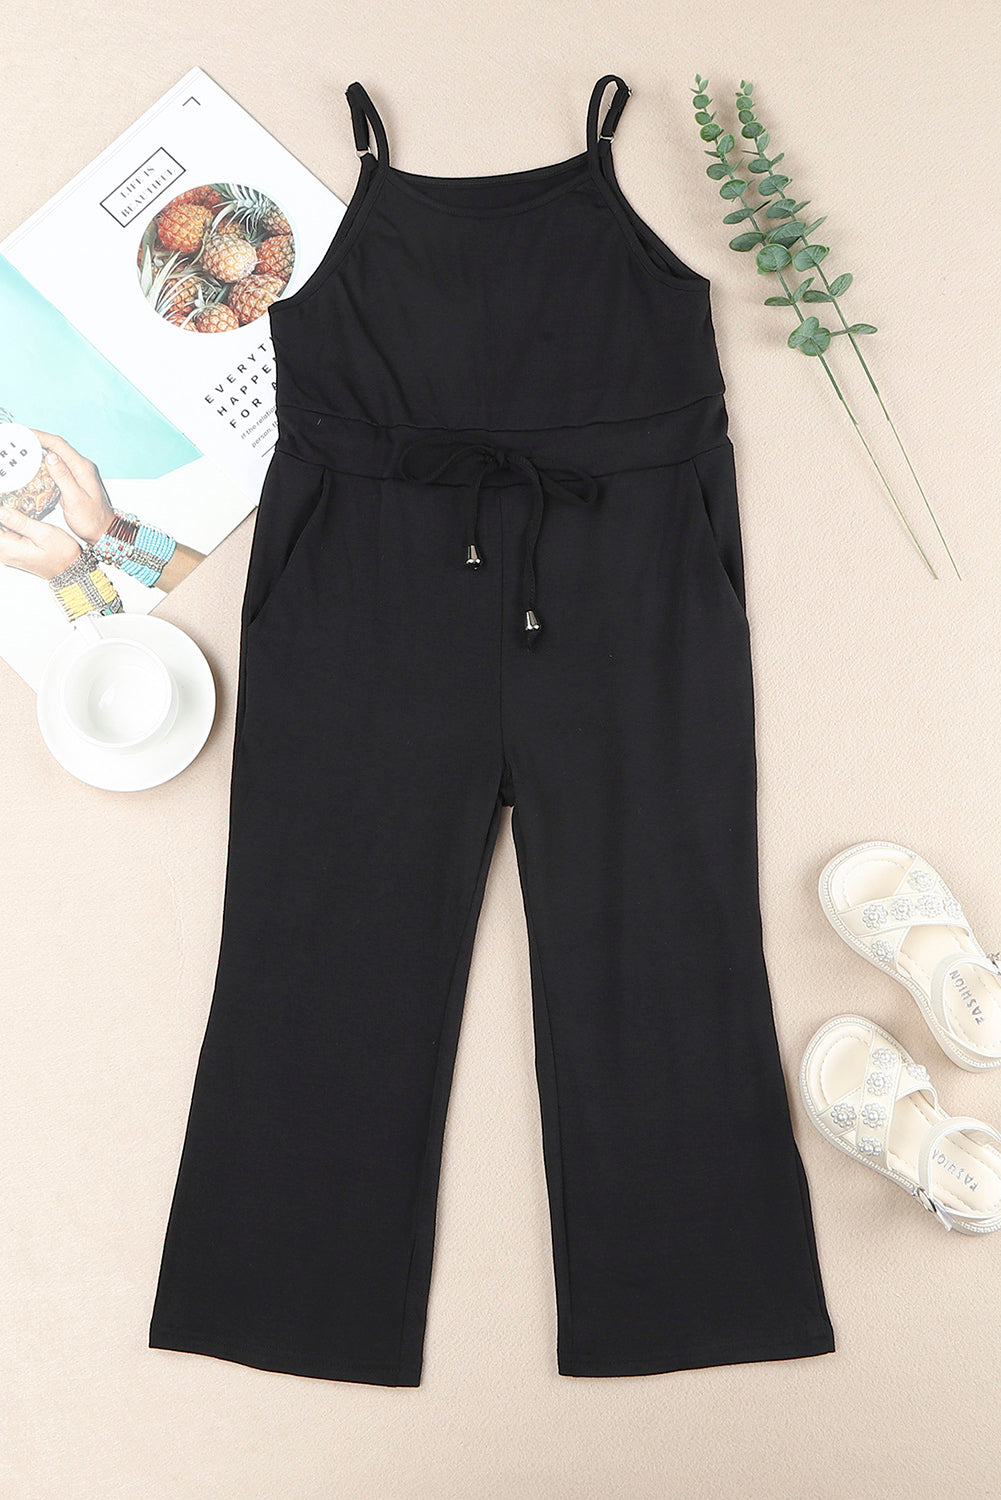 New Girl Jumpsuit Fashion Solid Color Jeans Overalls for Kids Teenage  Cotton Suspenders Clothes Loose Children